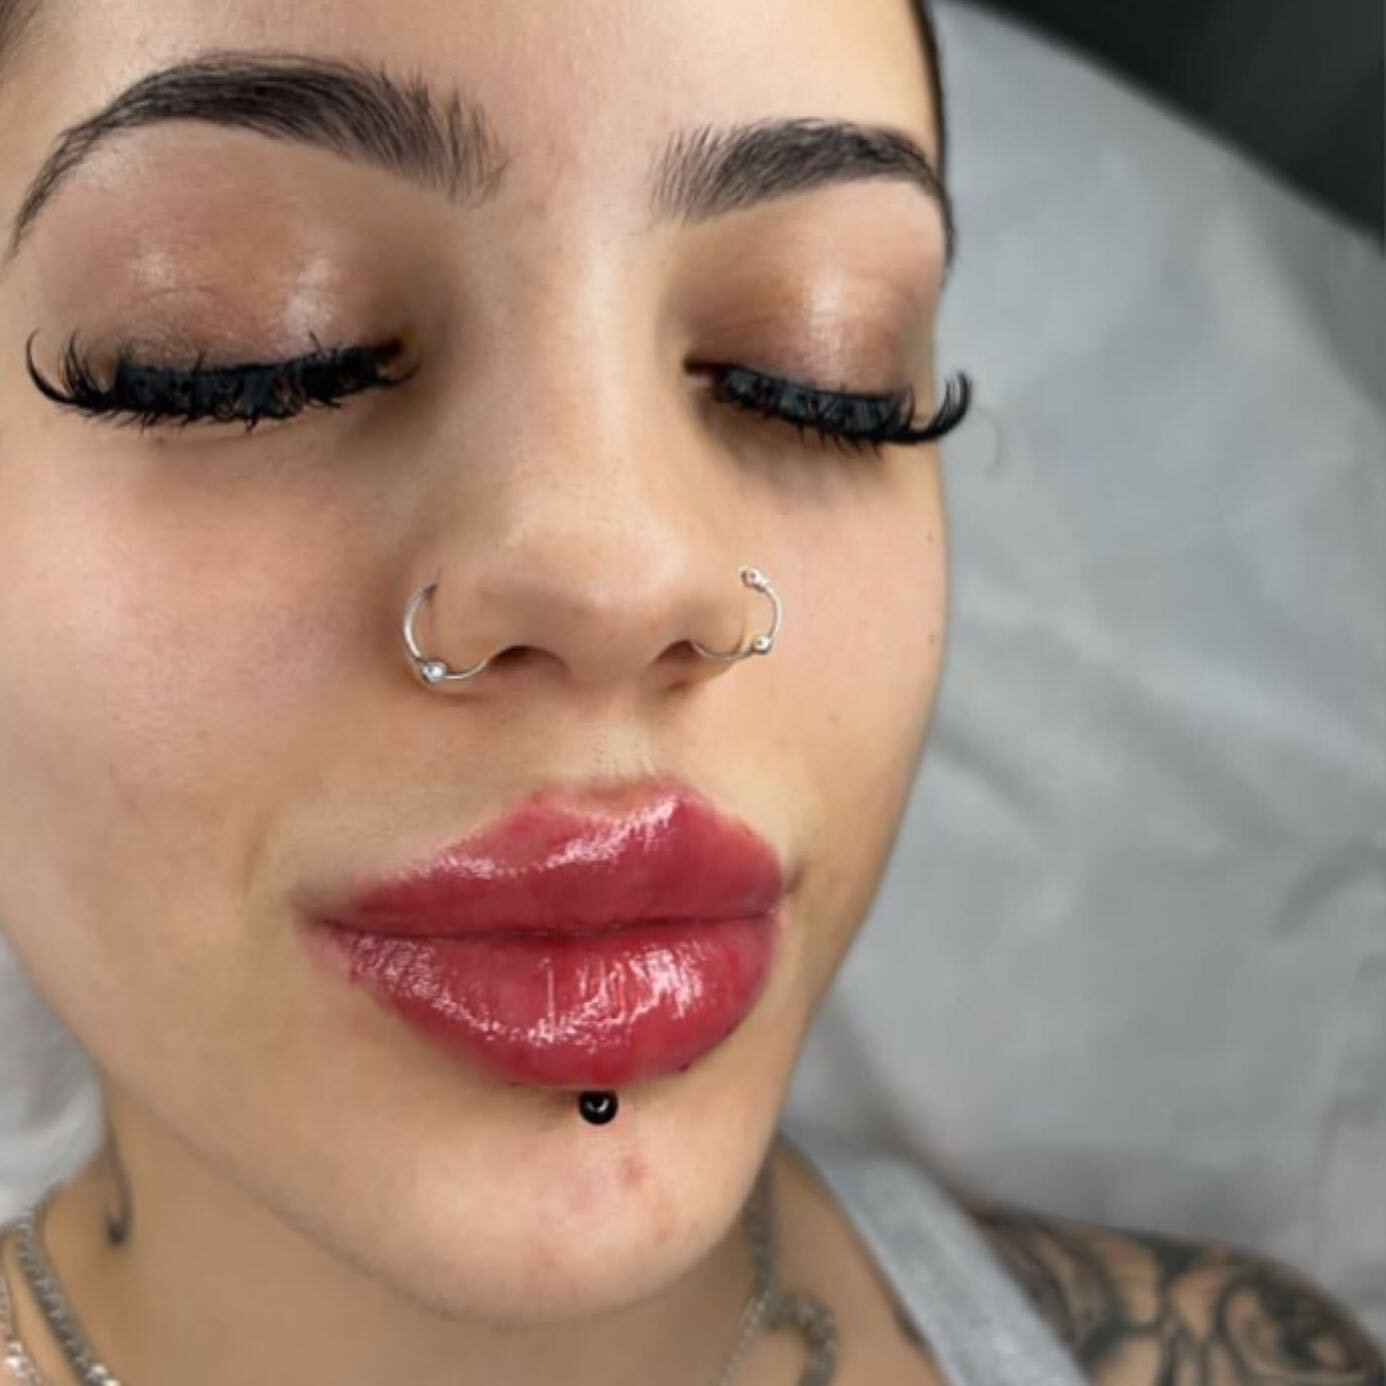 The perfect Sunday? Waking up to new Russian lips 😍

💞 Lip Fillers Can Make You 👇🏽 

𝐦𝐨𝐫𝐞 𝐜𝐨𝐧𝐟𝐢𝐝𝐞𝐧𝐭 
𝐥𝐞𝐬𝐬 𝐬𝐞𝐥𝐟 𝐜𝐨𝐧𝐬𝐜𝐢𝐨𝐮𝐬 
𝐧𝐨𝐭 𝐰𝐚𝐧𝐭 𝐭𝐨 𝐮𝐬𝐞 𝐚𝐬 𝐦𝐮𝐜𝐡 𝐦𝐚𝐤𝐞𝐮𝐩 
𝐟𝐞𝐞𝐥 𝐦𝐨𝐫𝐞 𝐧𝐚𝐭𝐮𝐫𝐚𝐥𝐥𝐲 ?